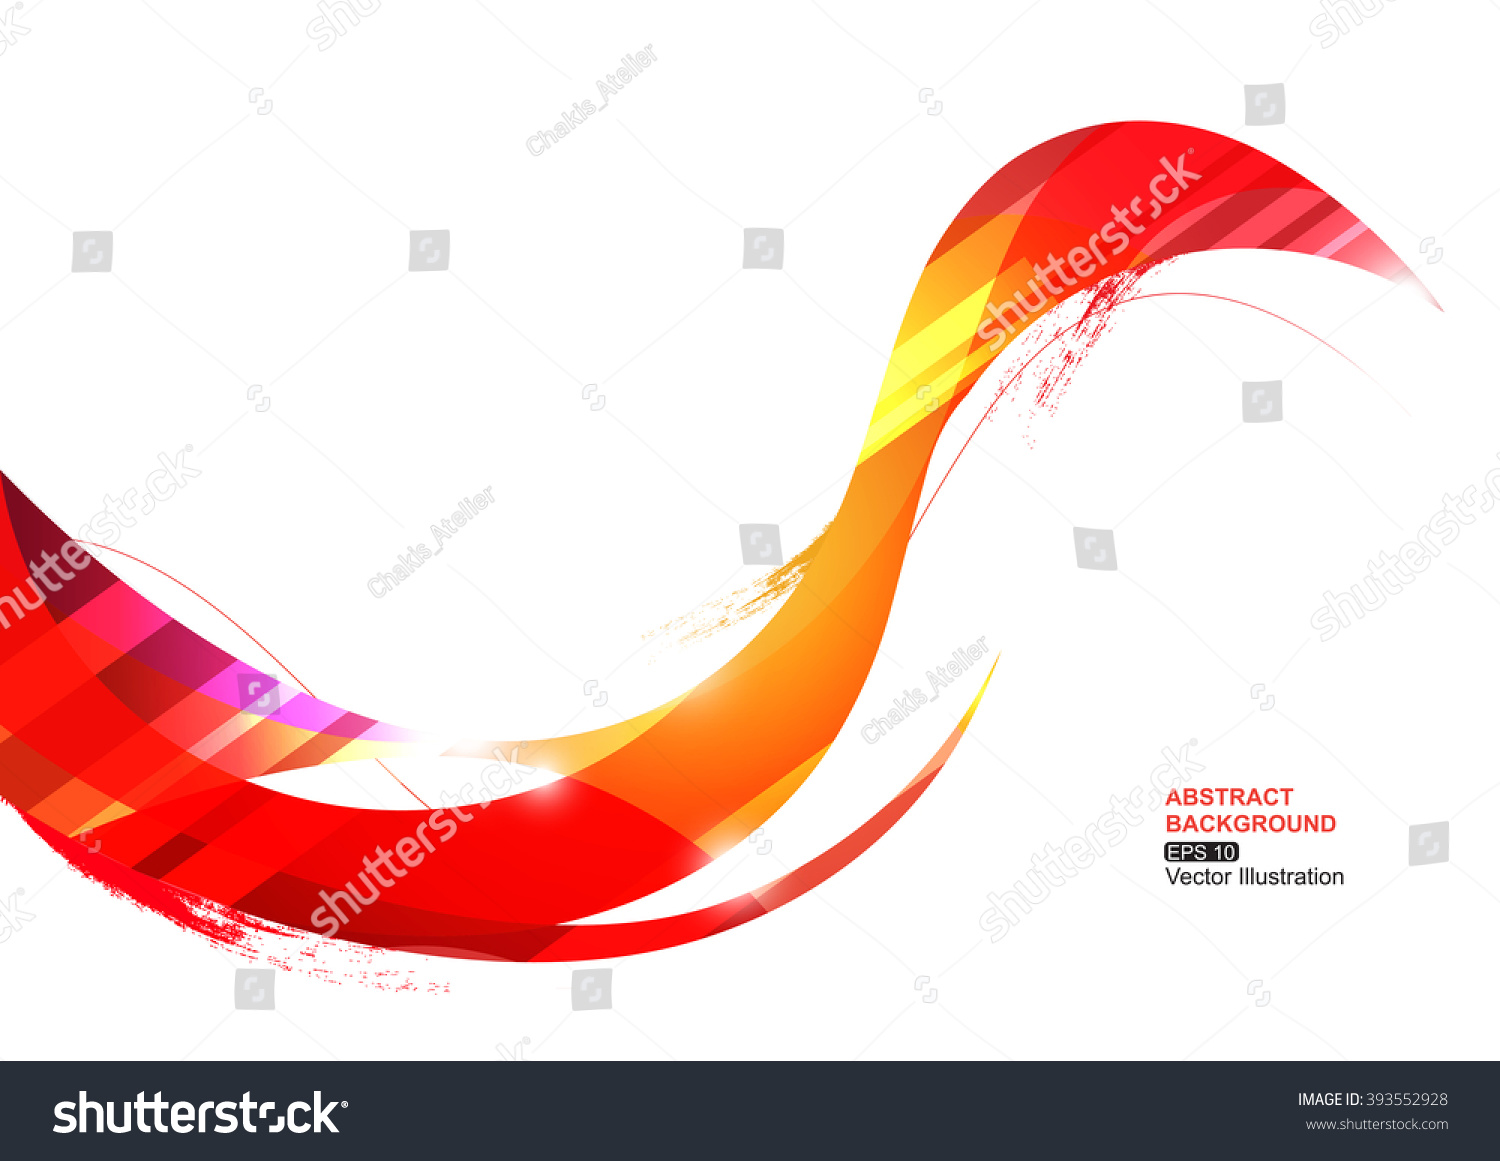 Background Red Stripe Stock Vector Royalty Free 393552928 Shutterstock 5460